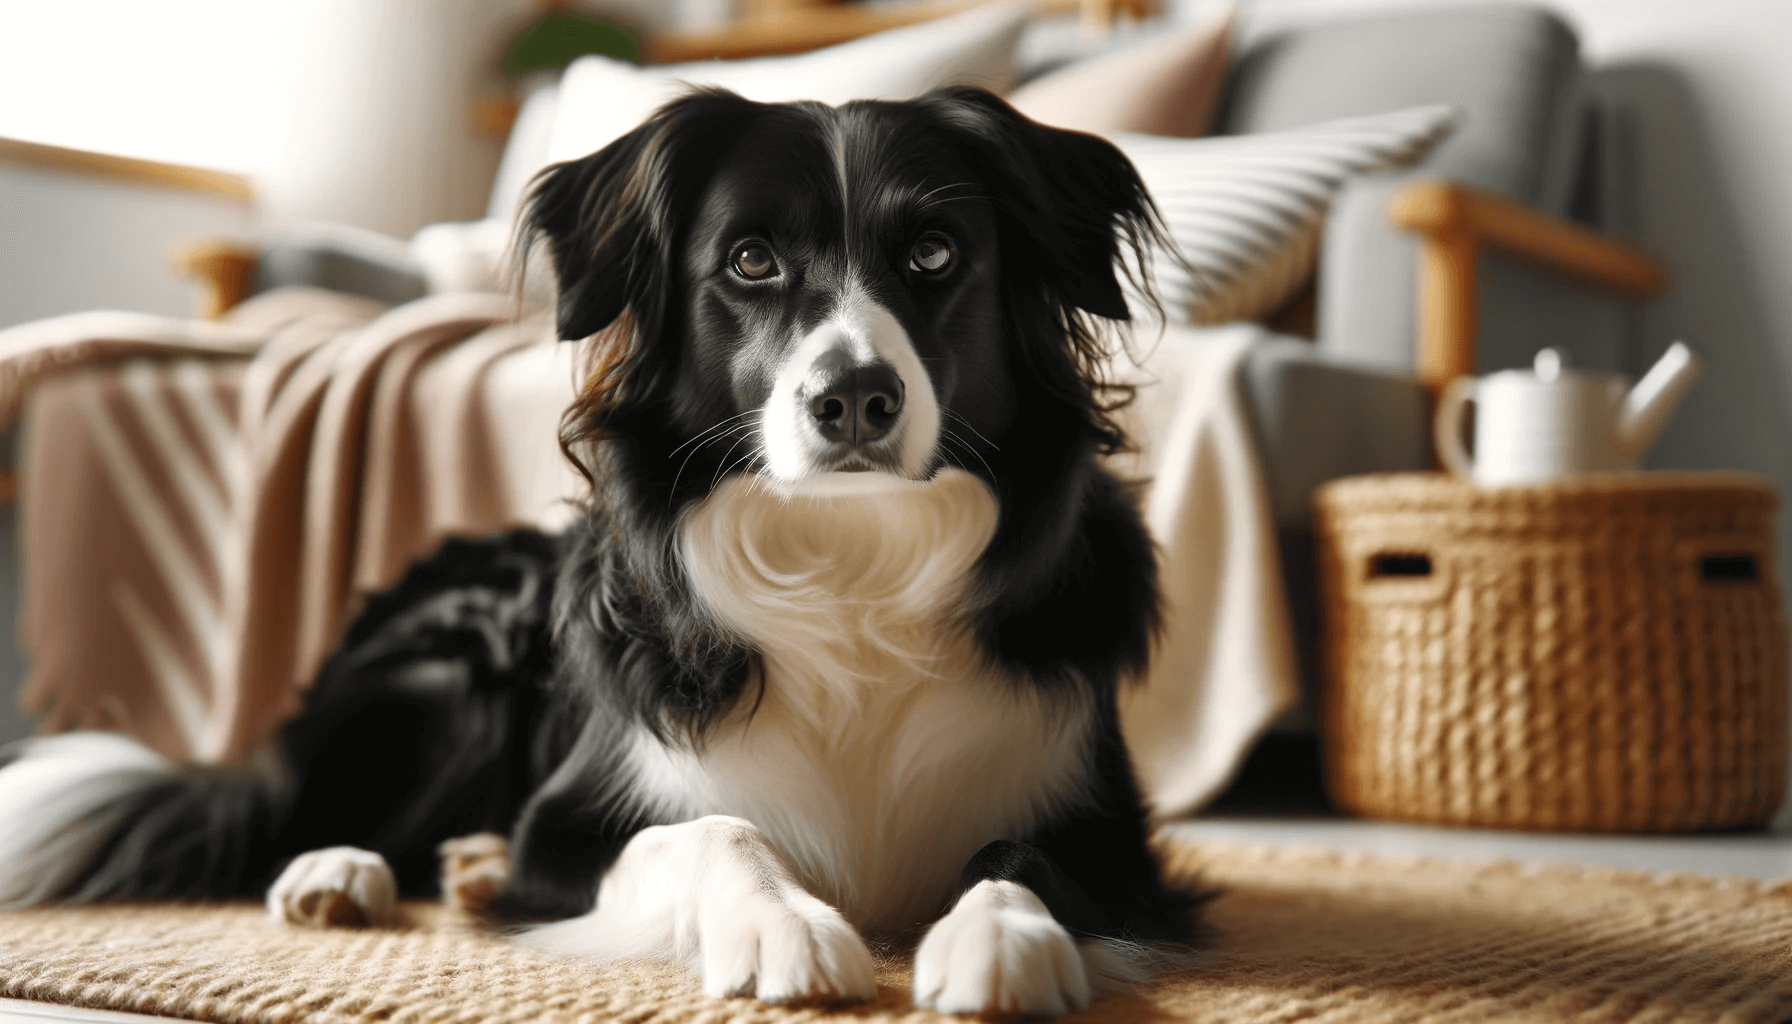 Black-and-white Borador Border Collie Lab Mix resting in a home environment. The dog should appear calm and alert, indicative of the breed.